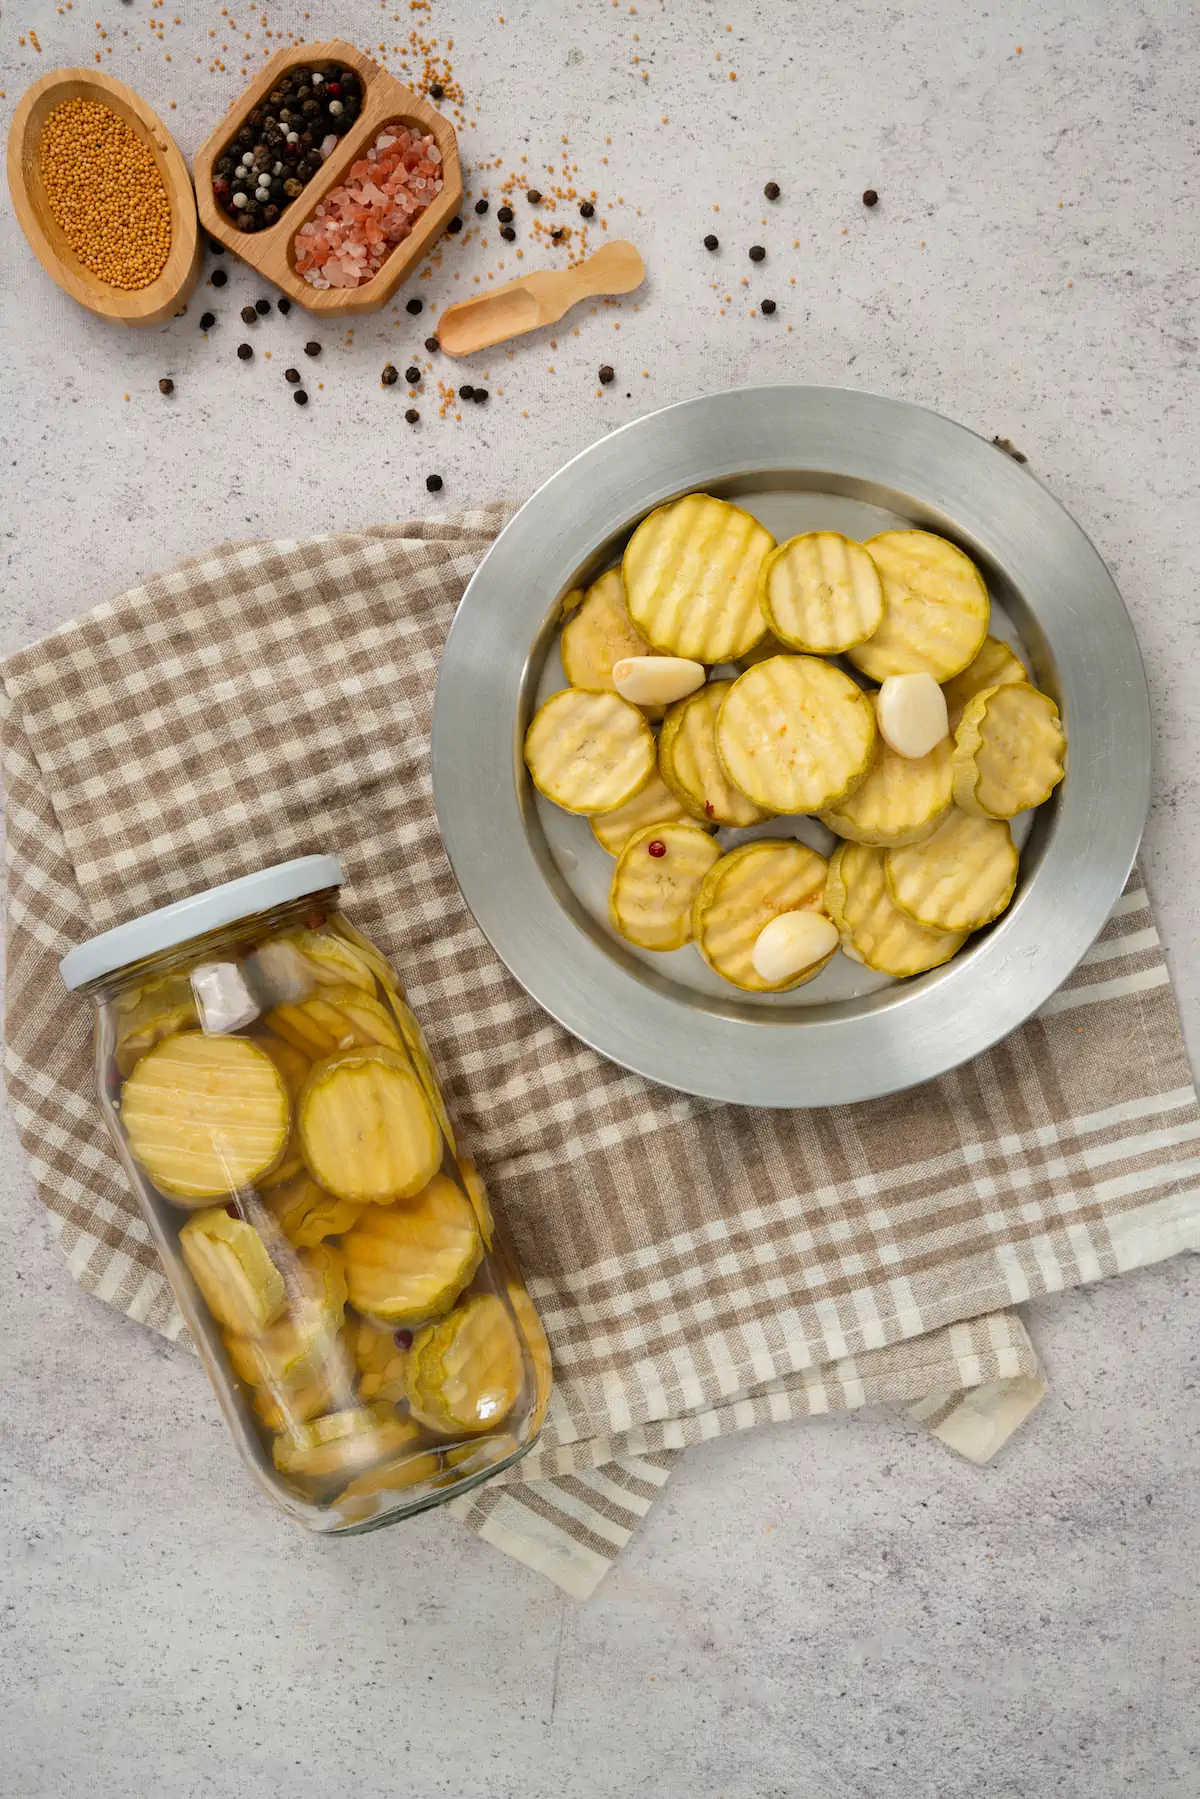 Sliced zucchini pickles served on a plate alongside a jar of the same pickles.